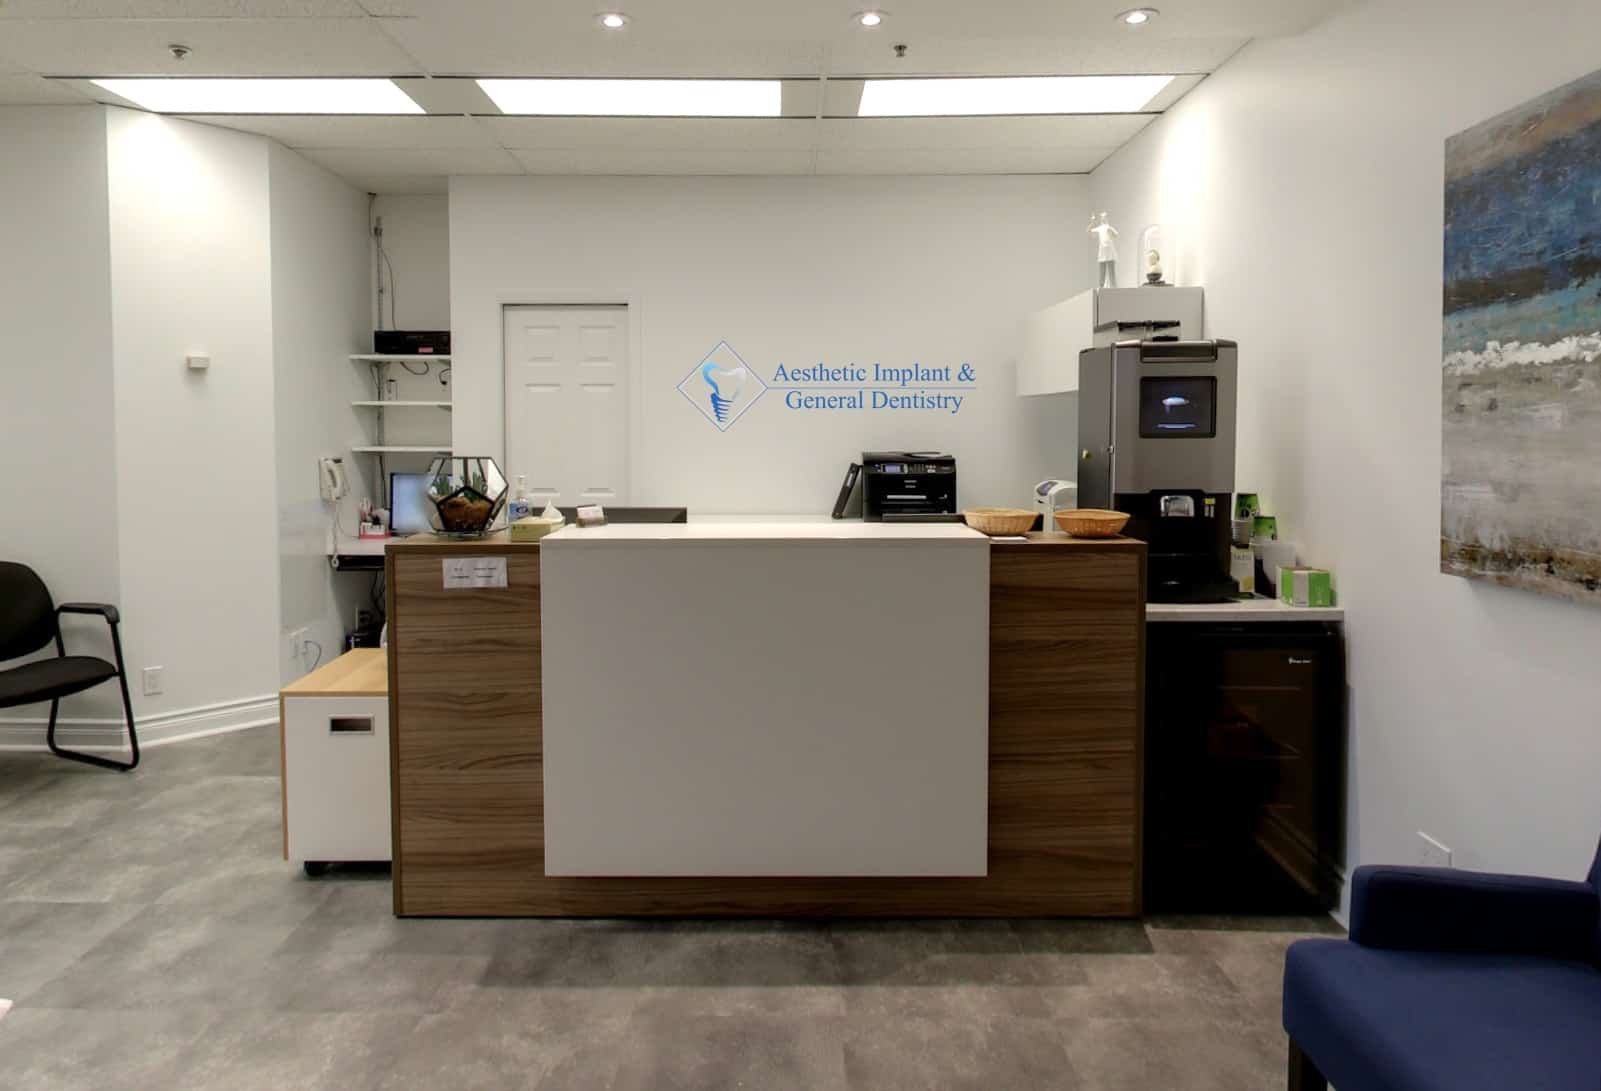 Aesthetic Implant Dentistry reception area.